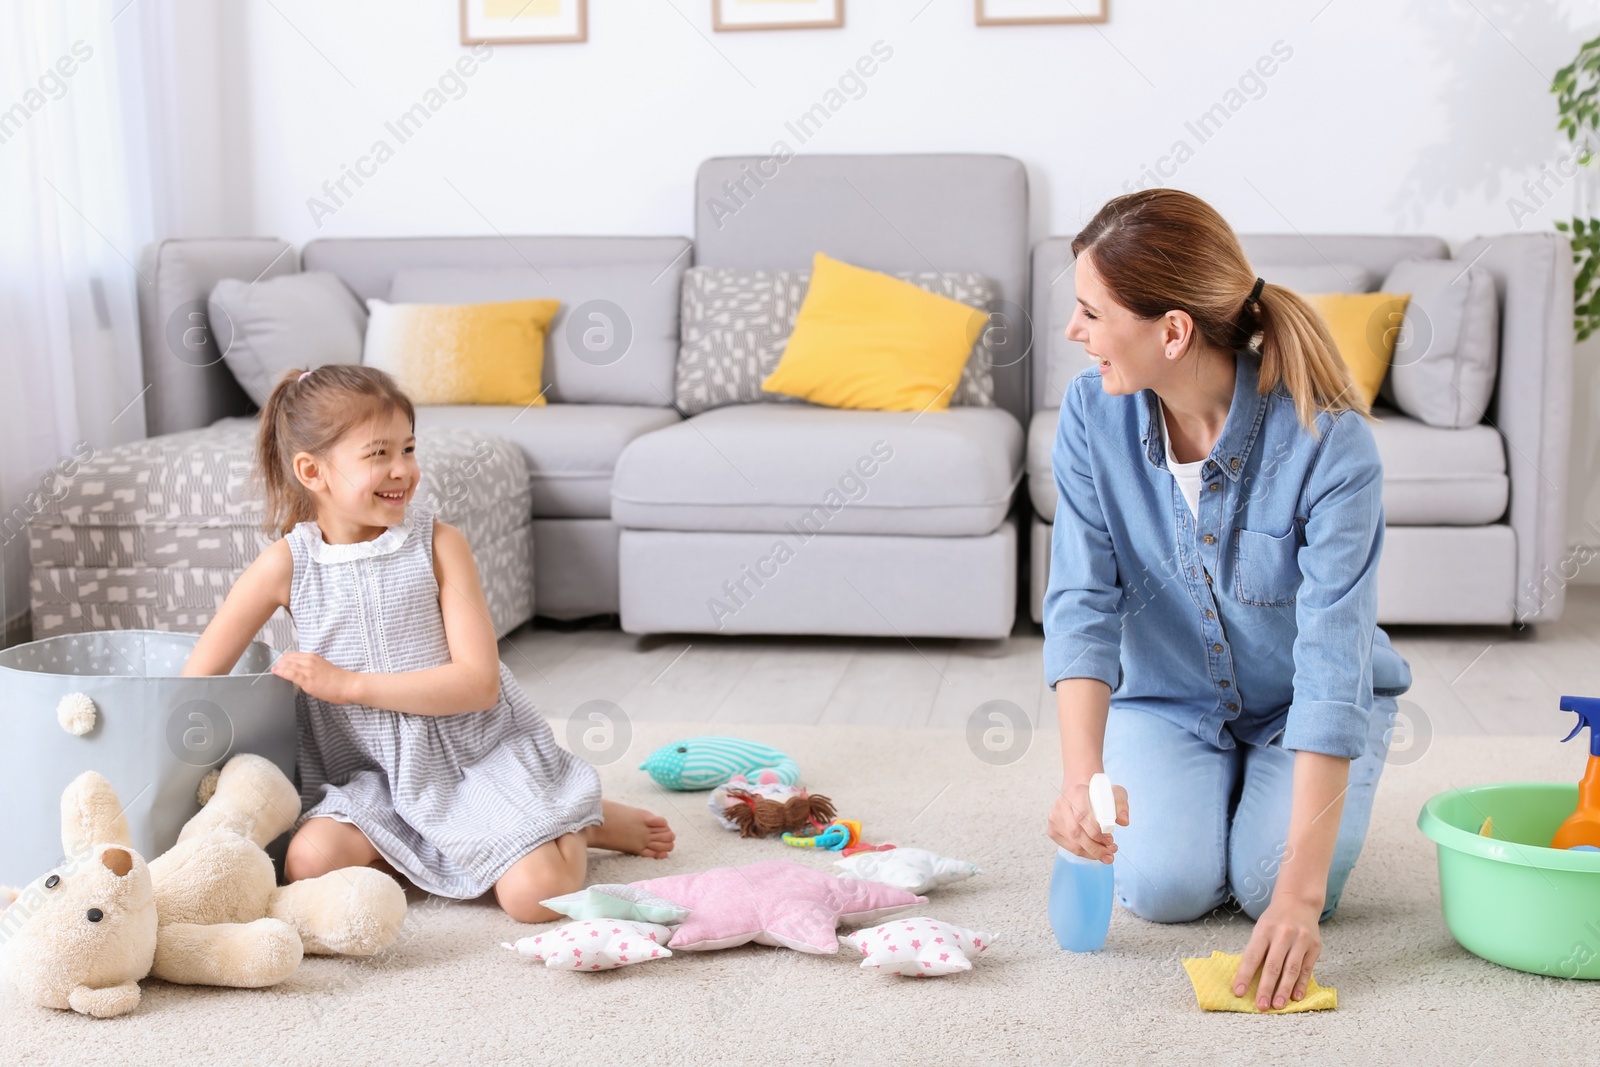 Photo of Housewife and daughter cleaning room together